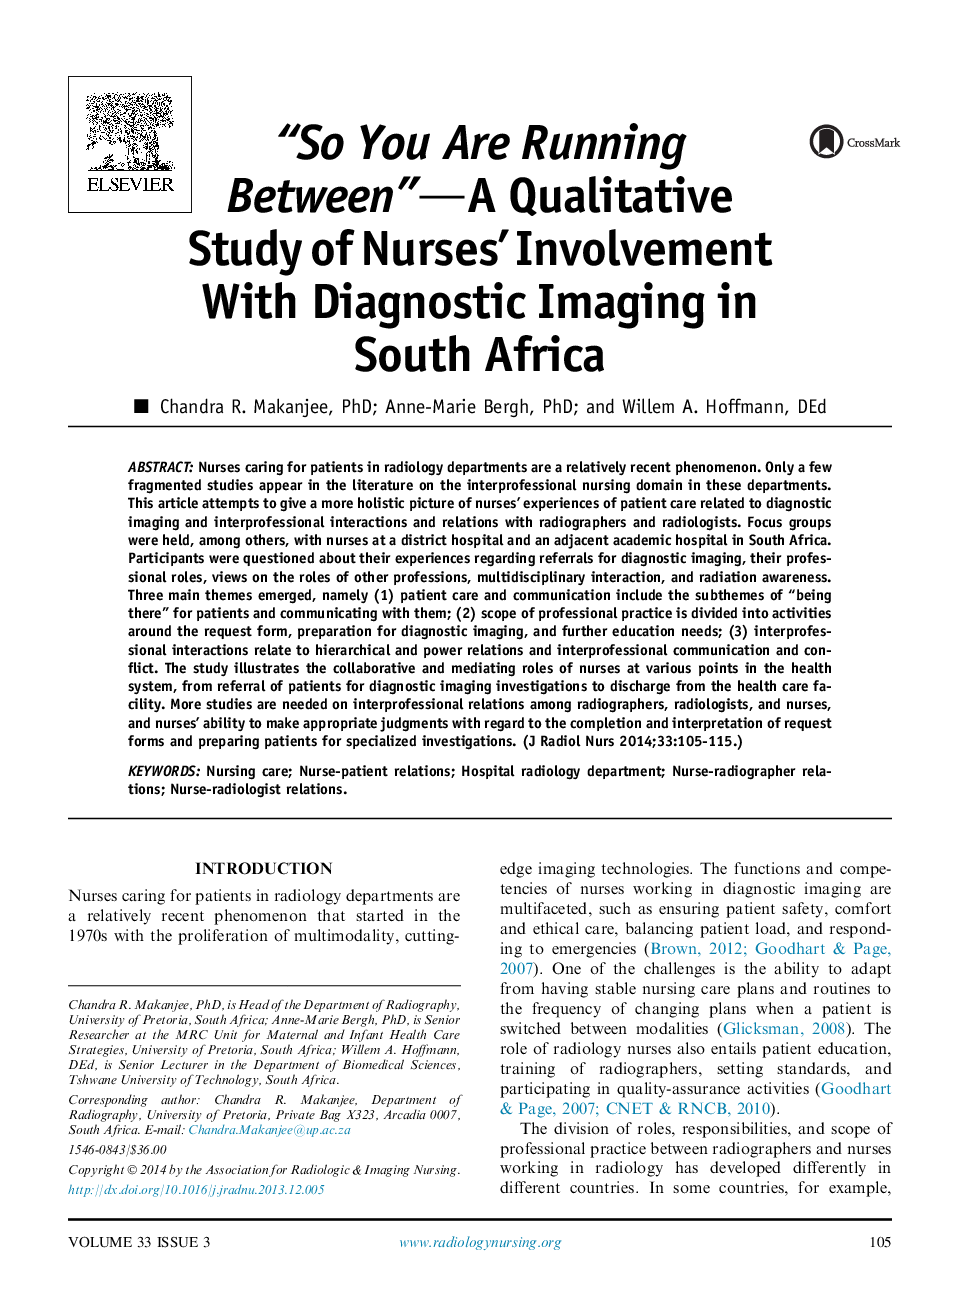 “So You Are Running Between”—A Qualitative Study of Nurses' Involvement With Diagnostic Imaging in South Africa